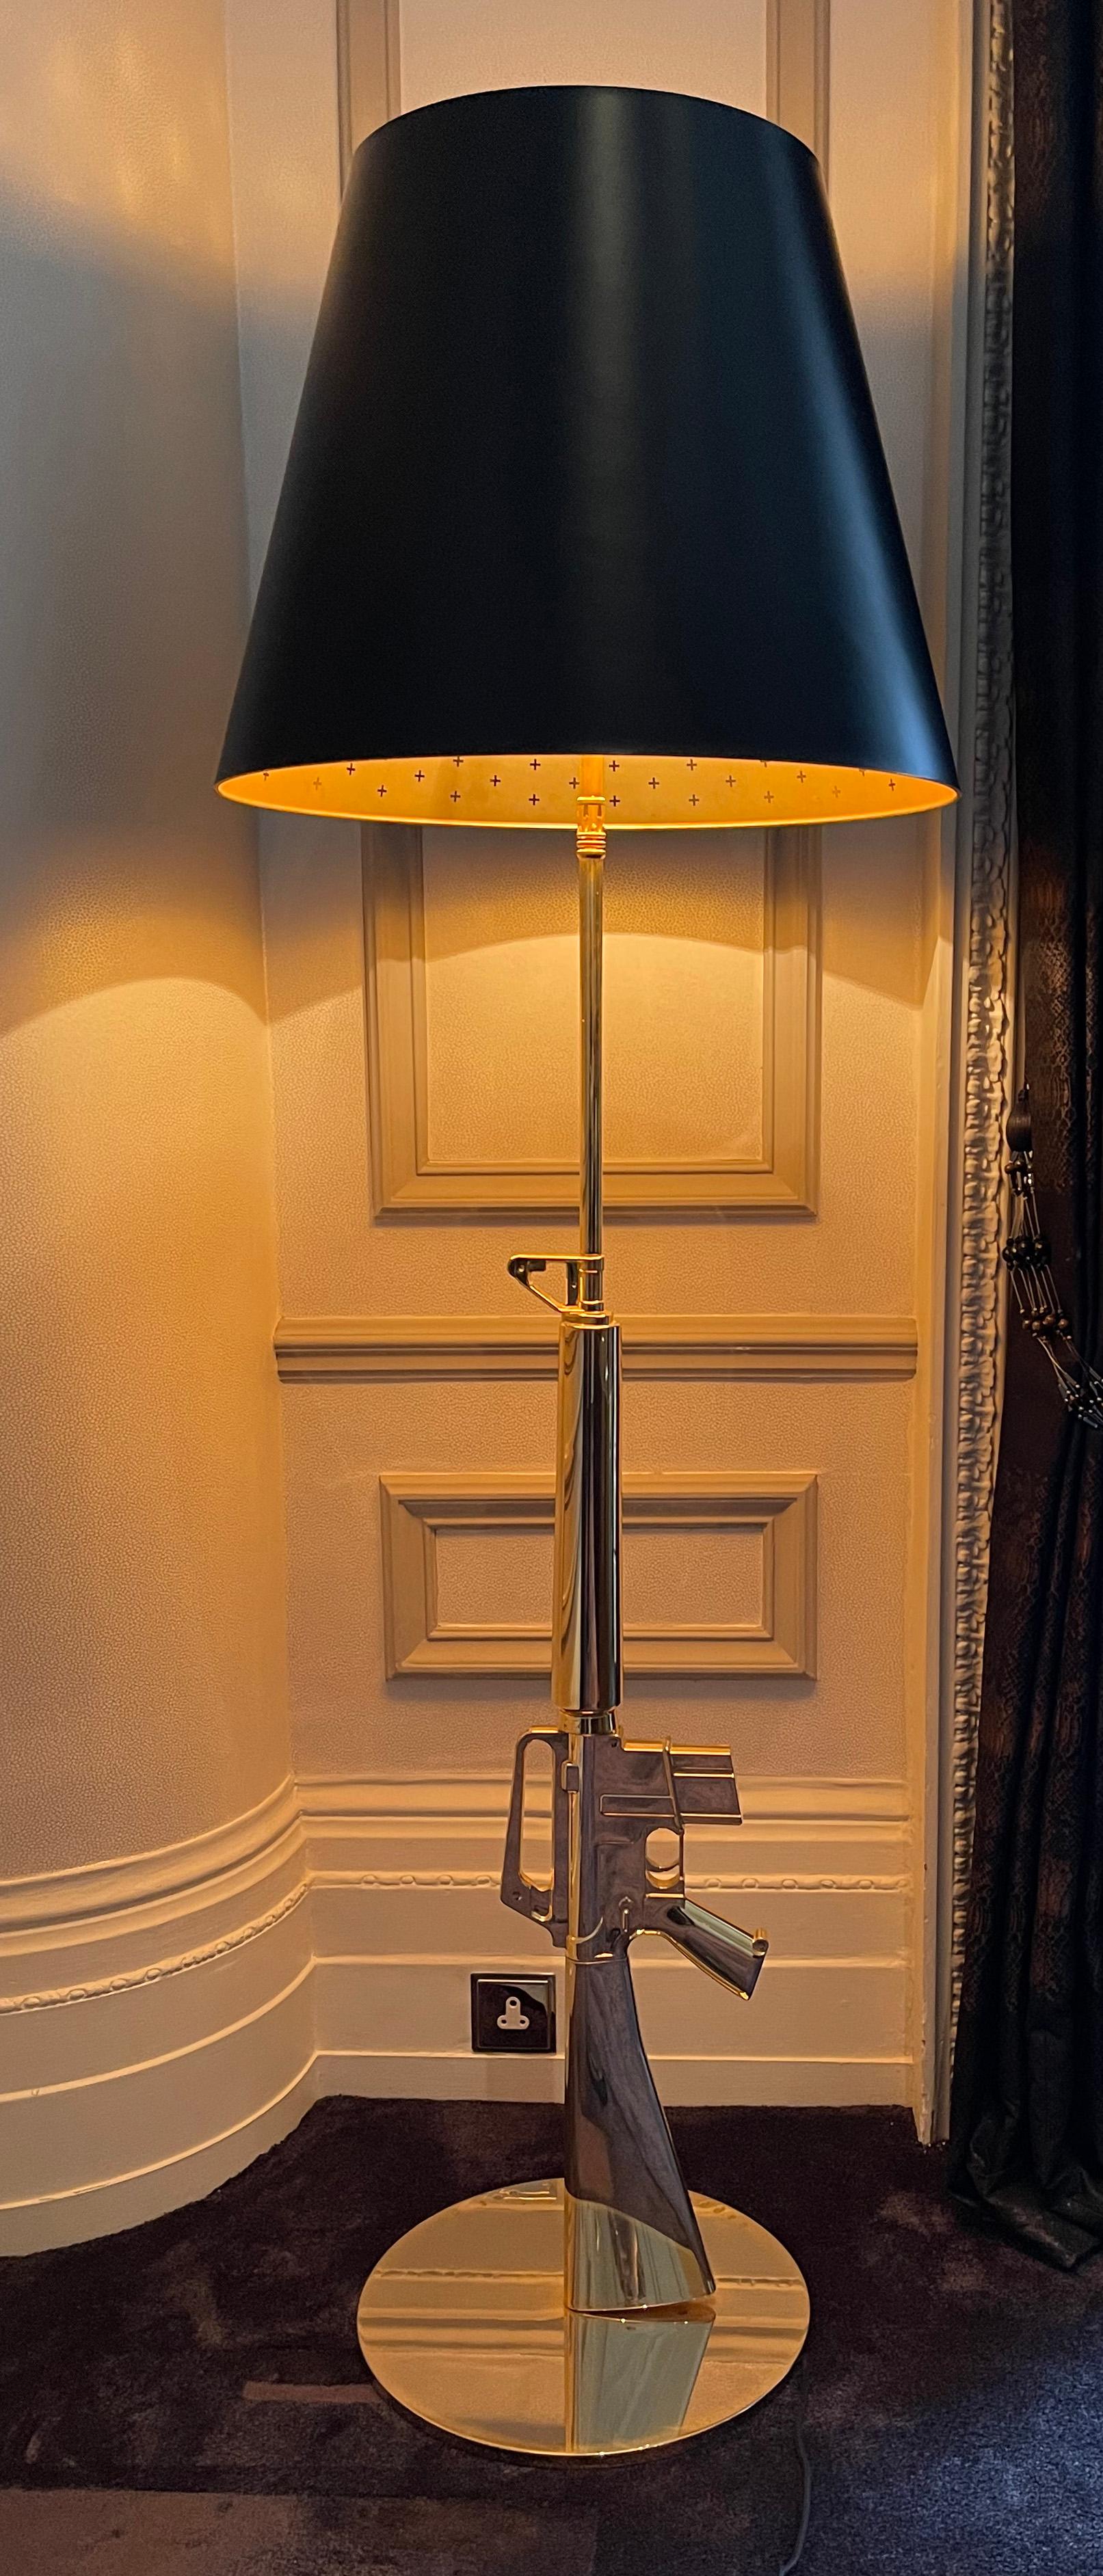  Philippe Starck Rifle floor lamps

 Philippe Starck for FLOS M16 AK47 Machine Gun Rifle Floor Lamps - a striking collaboration by Philippe Starck for FLOS

This Philippe Starck creation does more than illuminate—it enlightens. The sleek and edgy